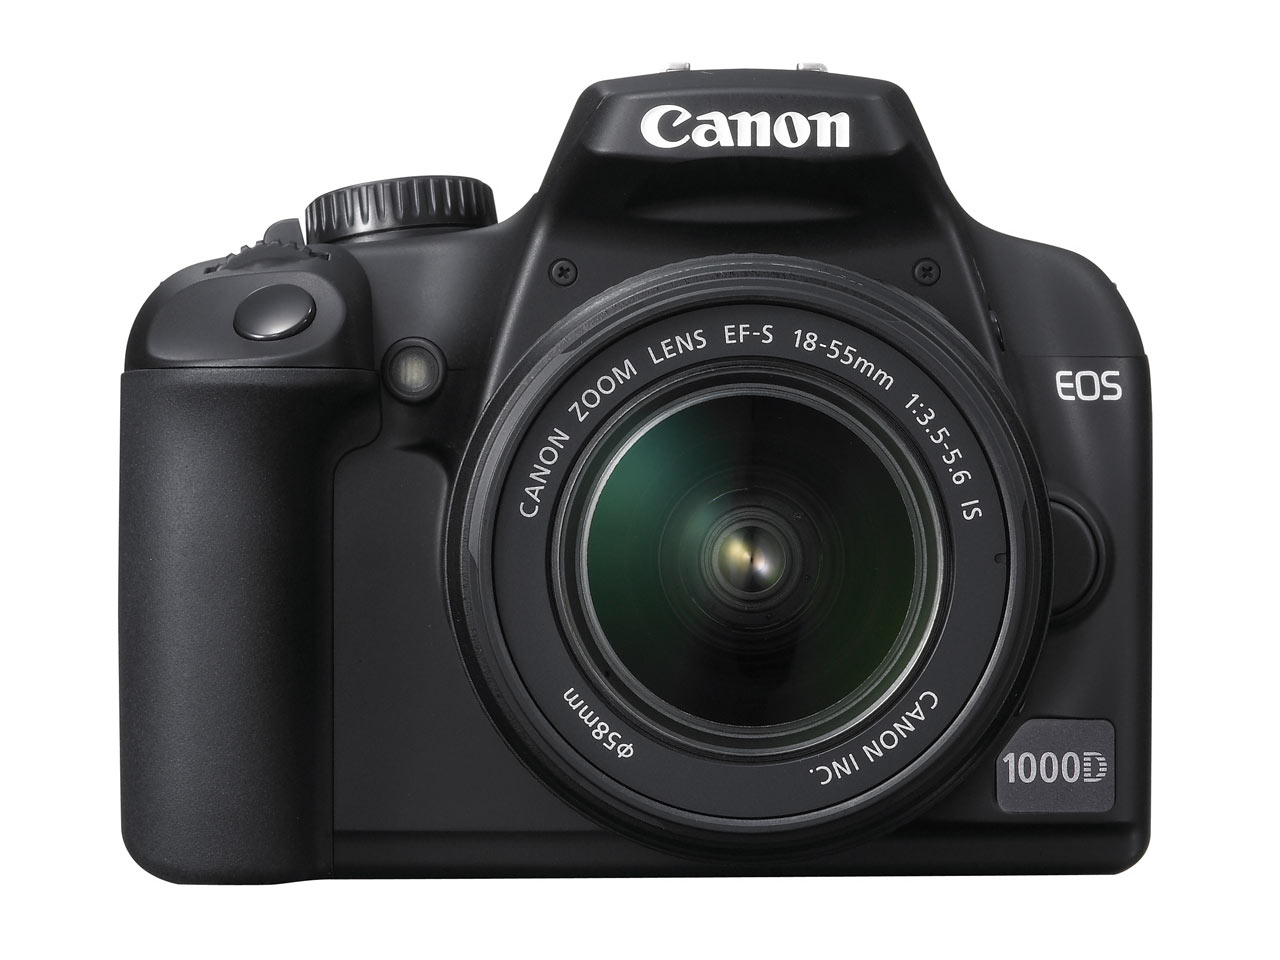 Canon eos rebel t3i software for mac